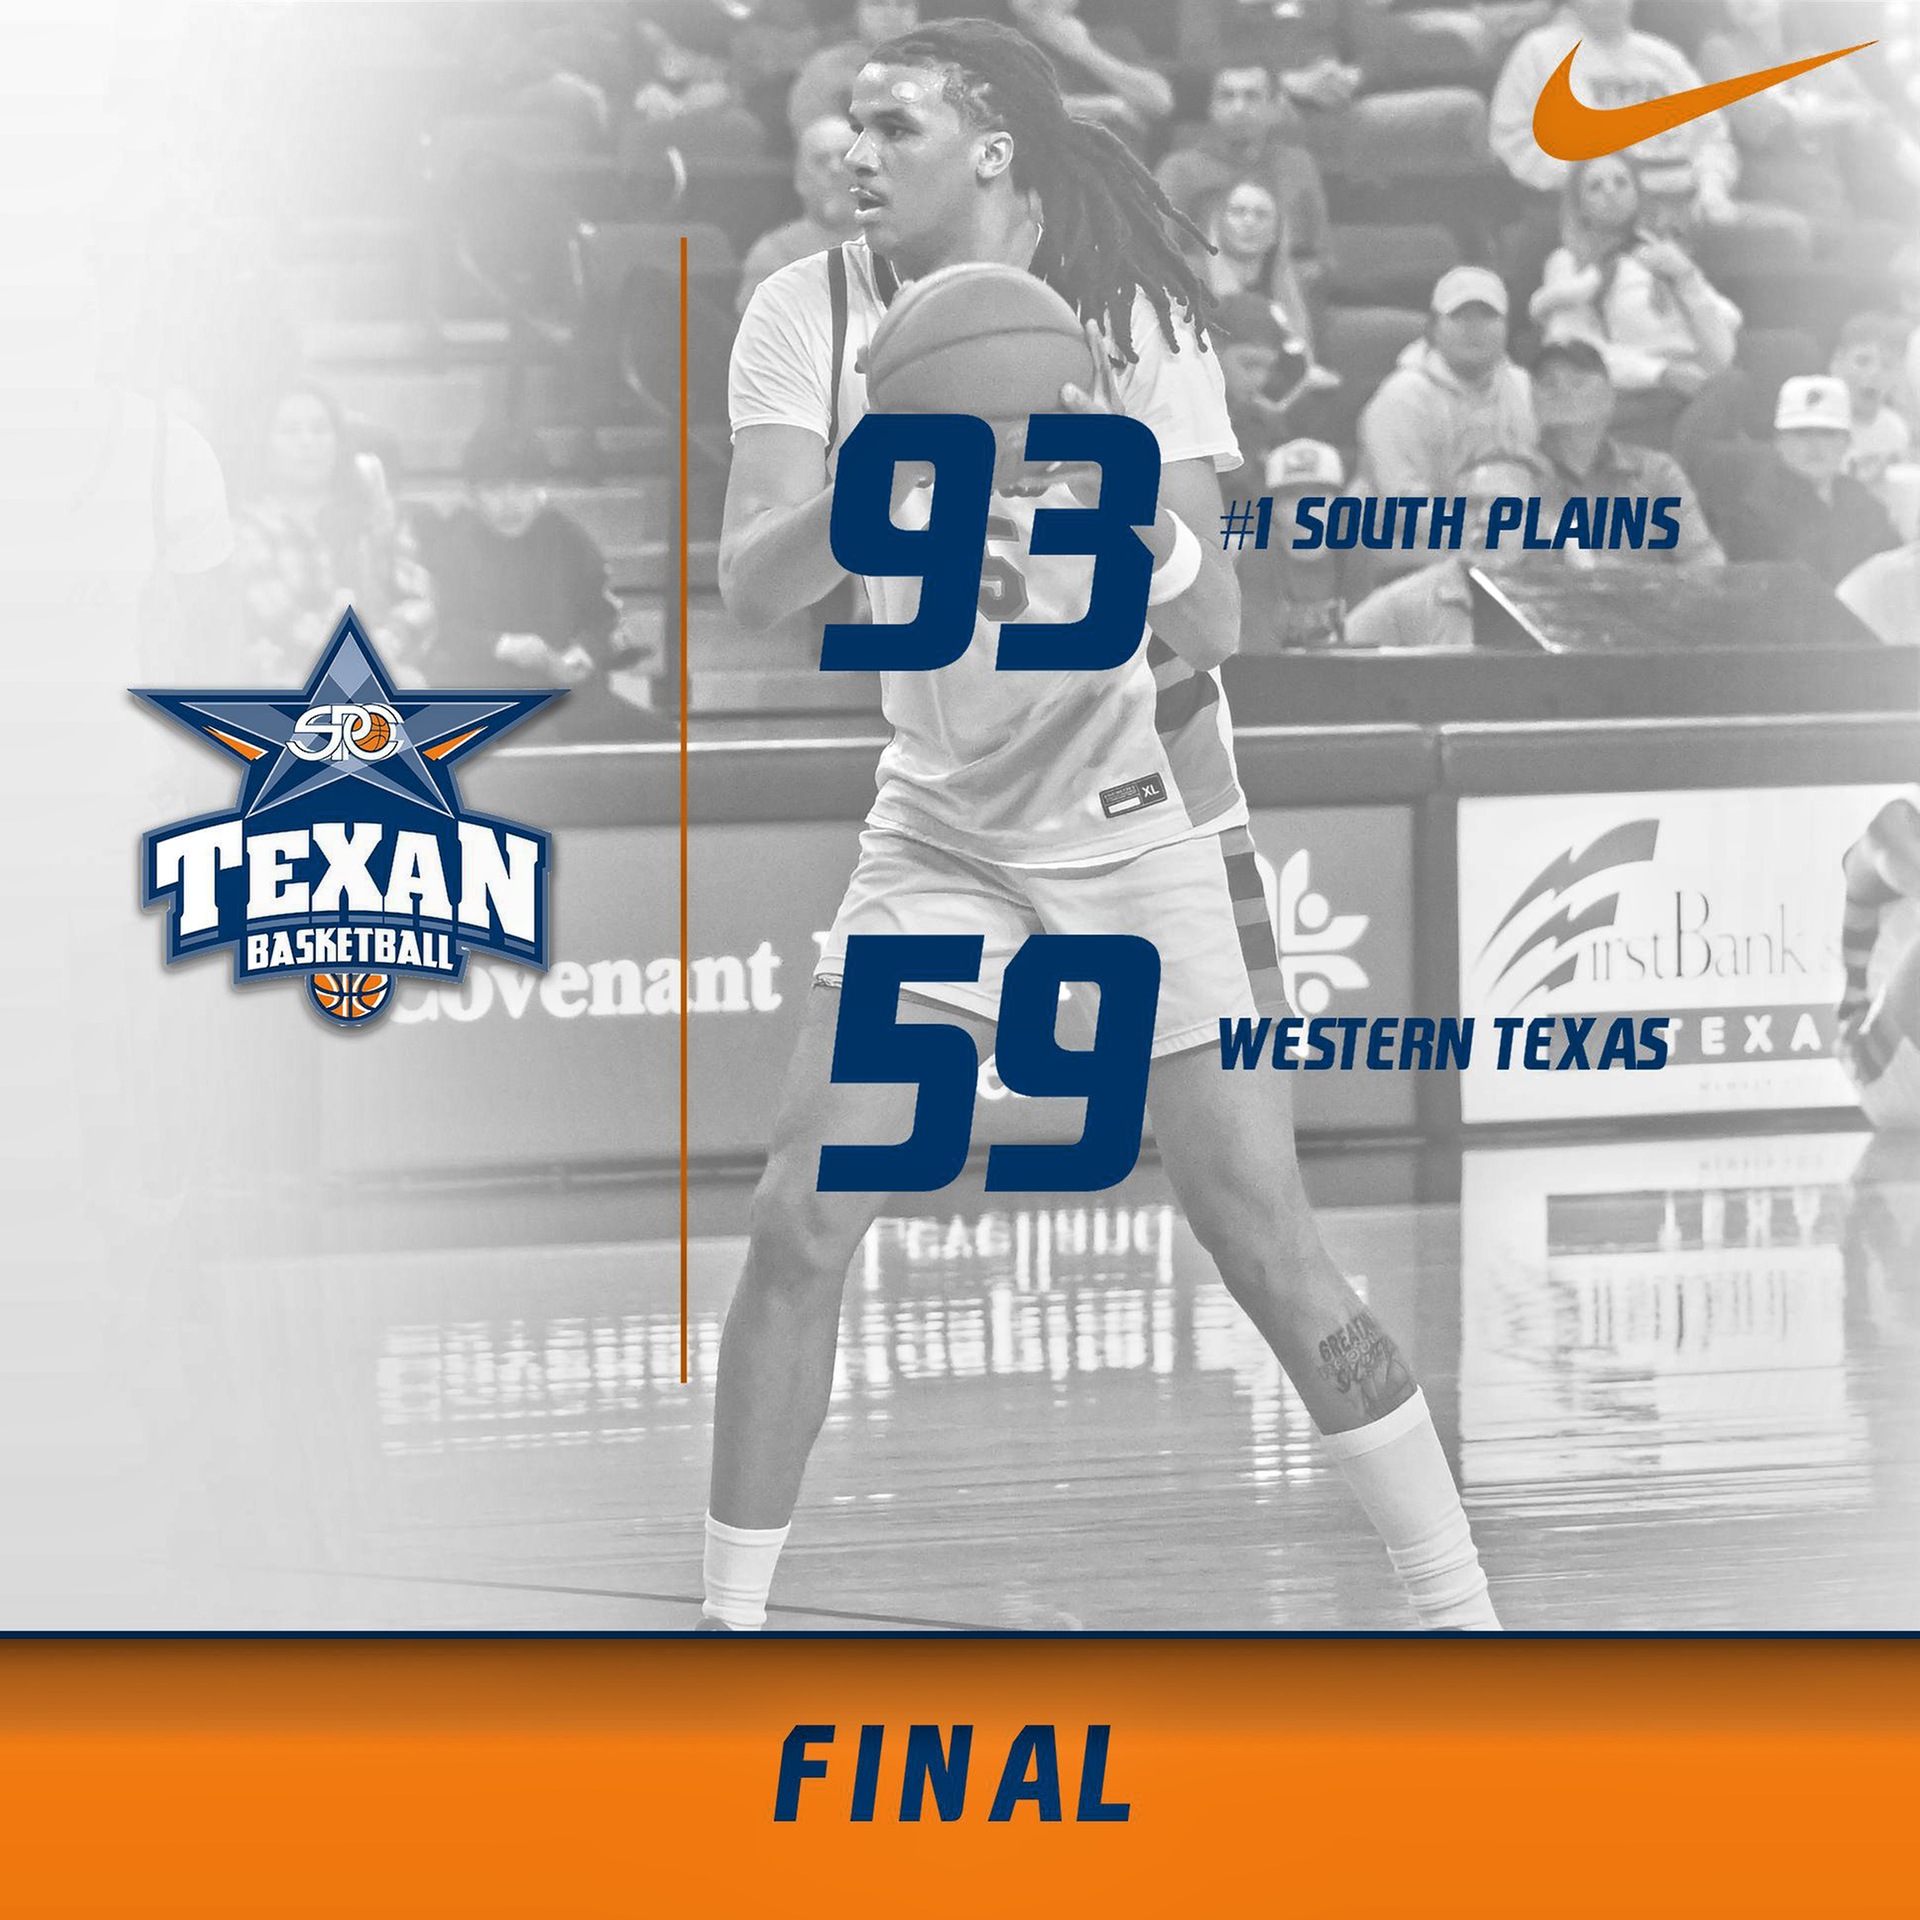 Second half surge, balanced offensive attack leads #1 Texans past Western Texas 93-59